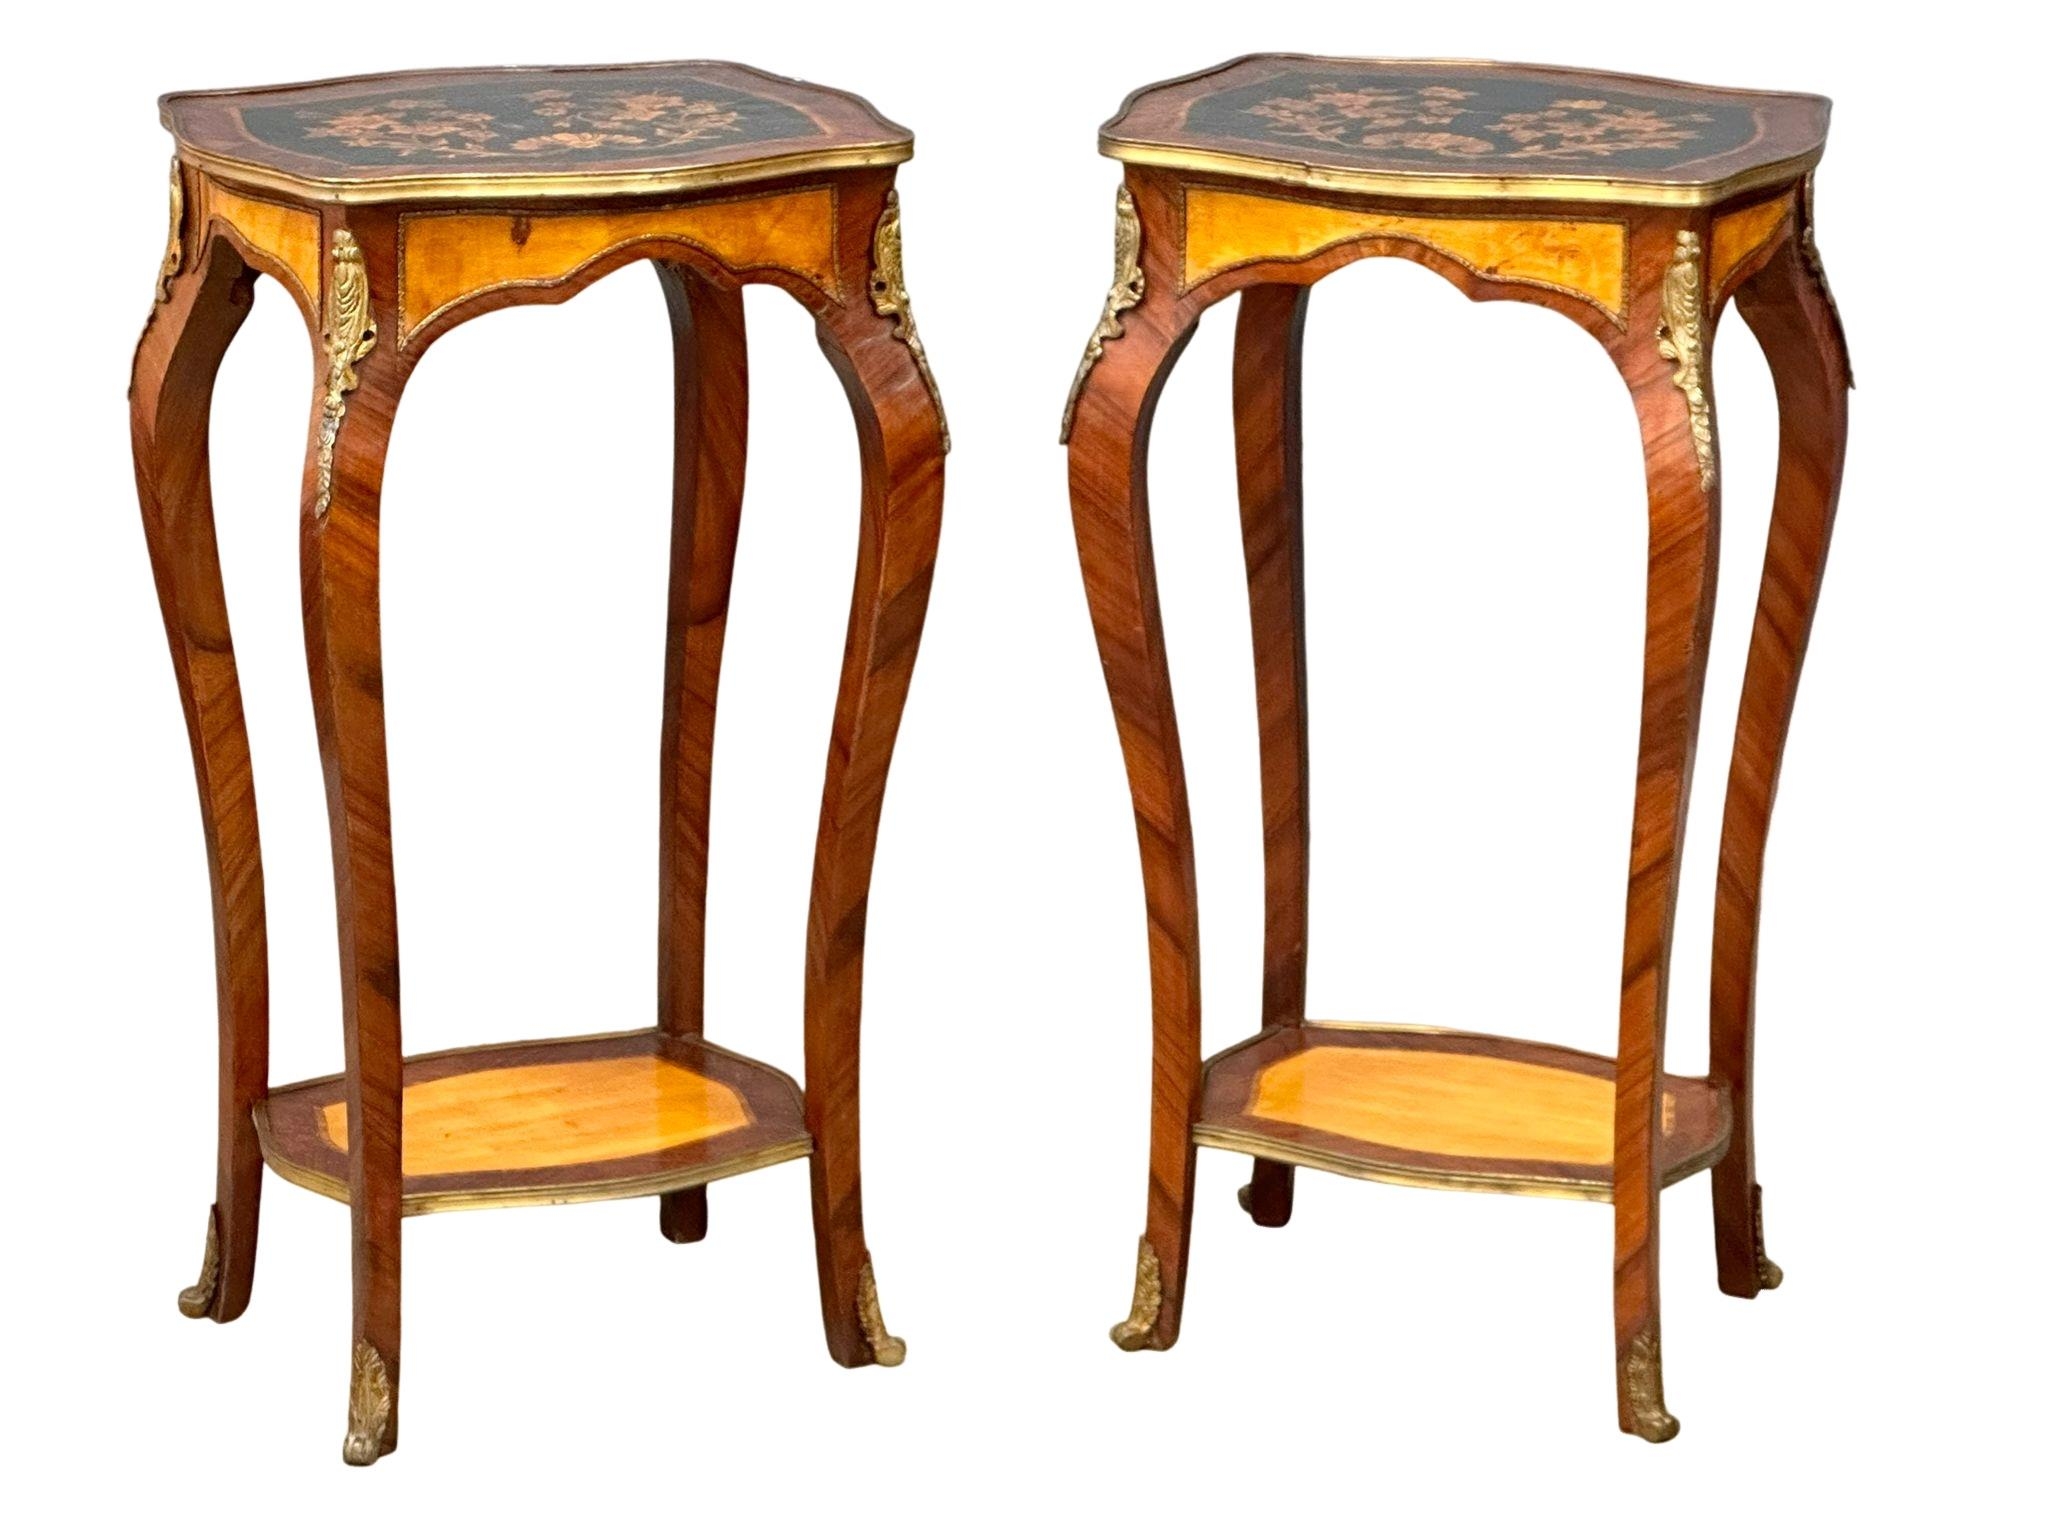 A pair of large Early 20th Century French marquetry inlaid side tables/plantstands with brass ormolu